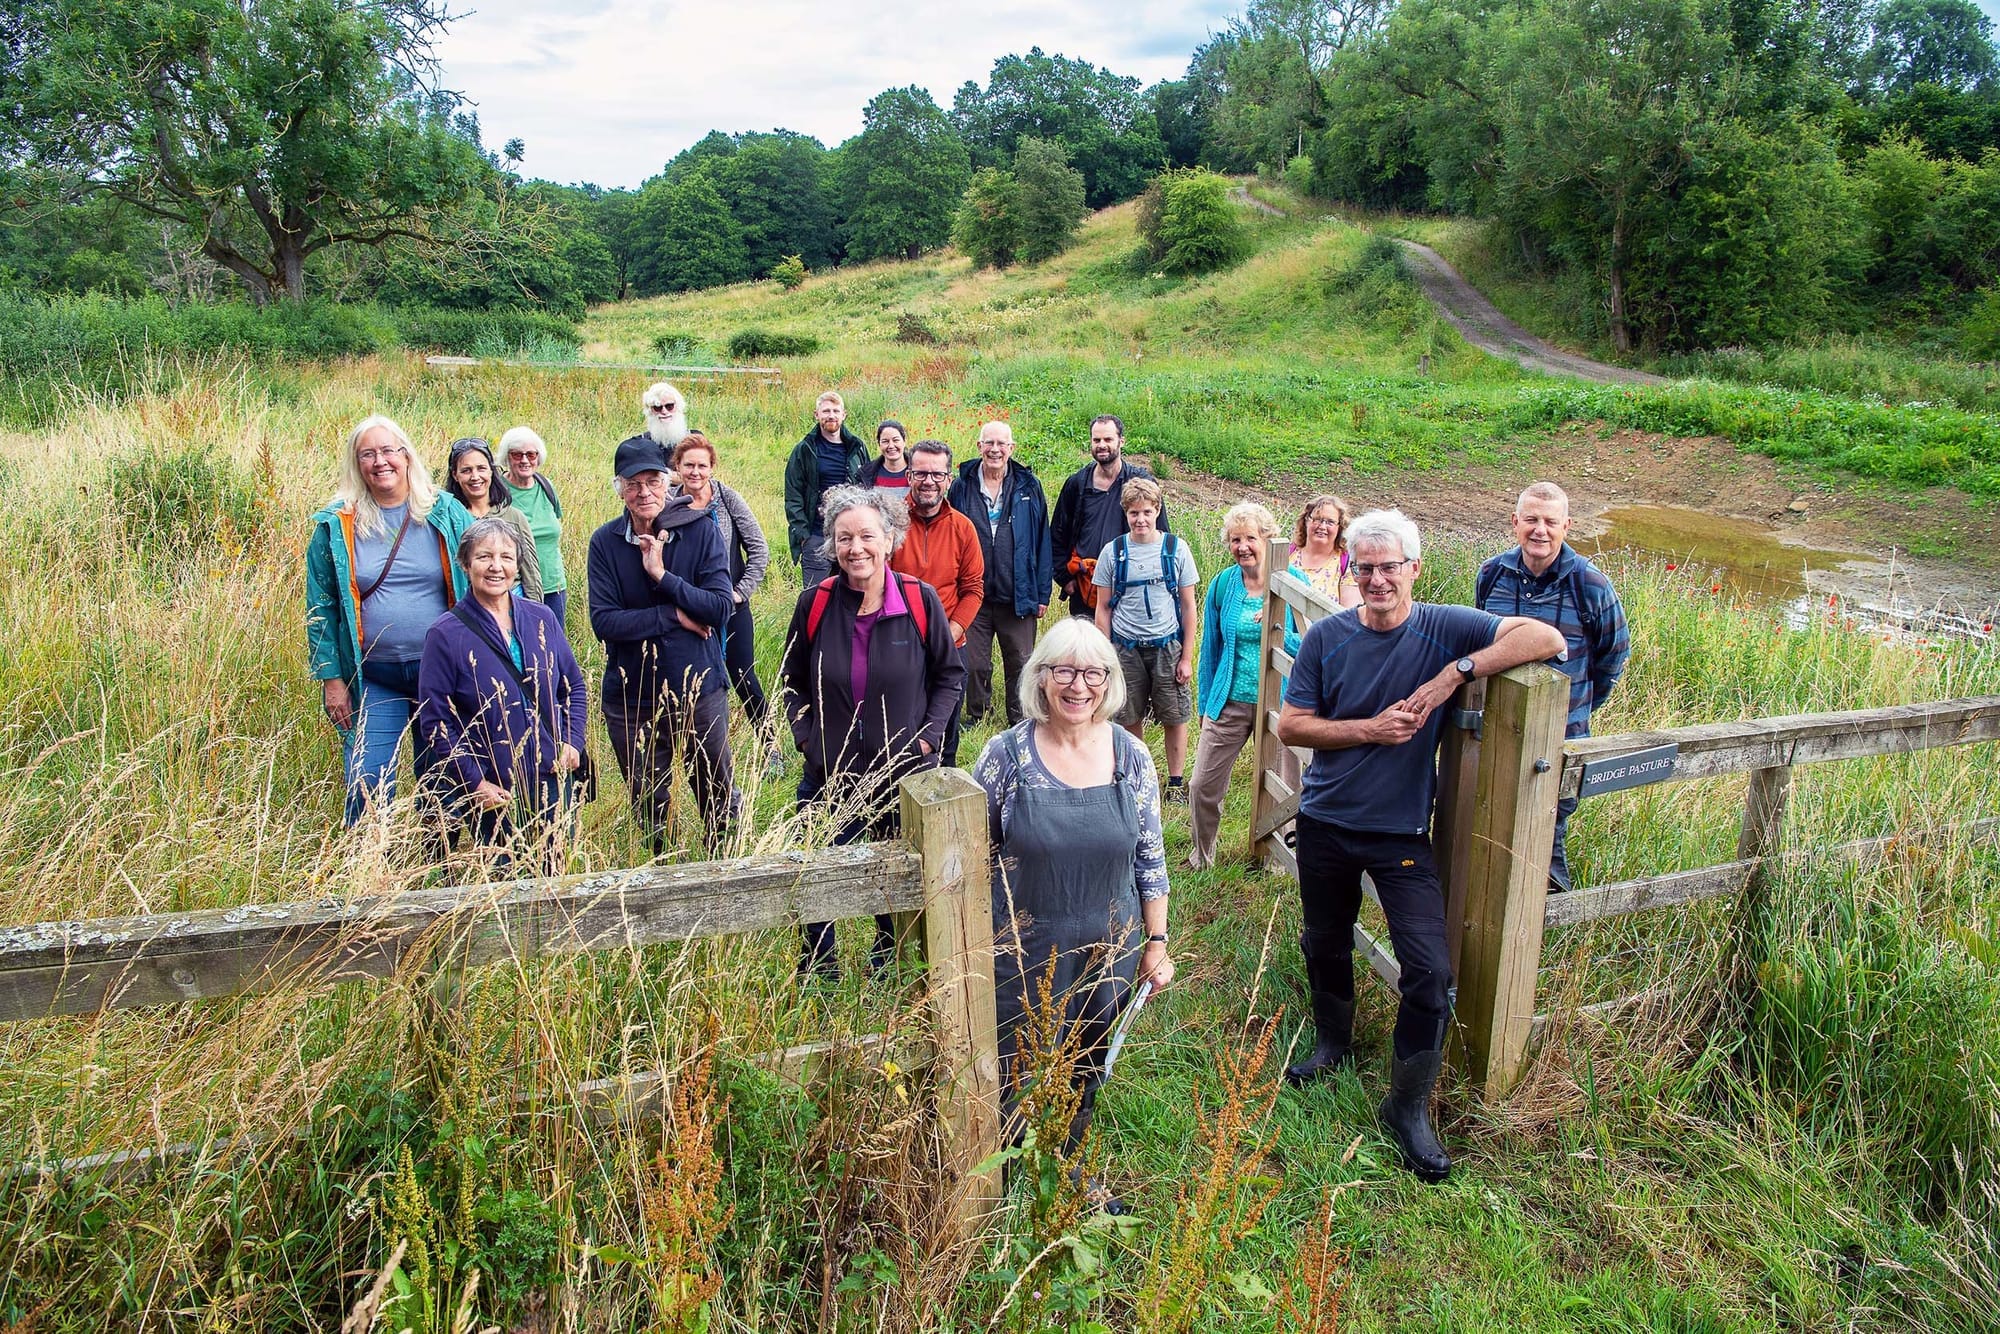 A group of people posing outdoors, at a fence opening in a green natural landscape